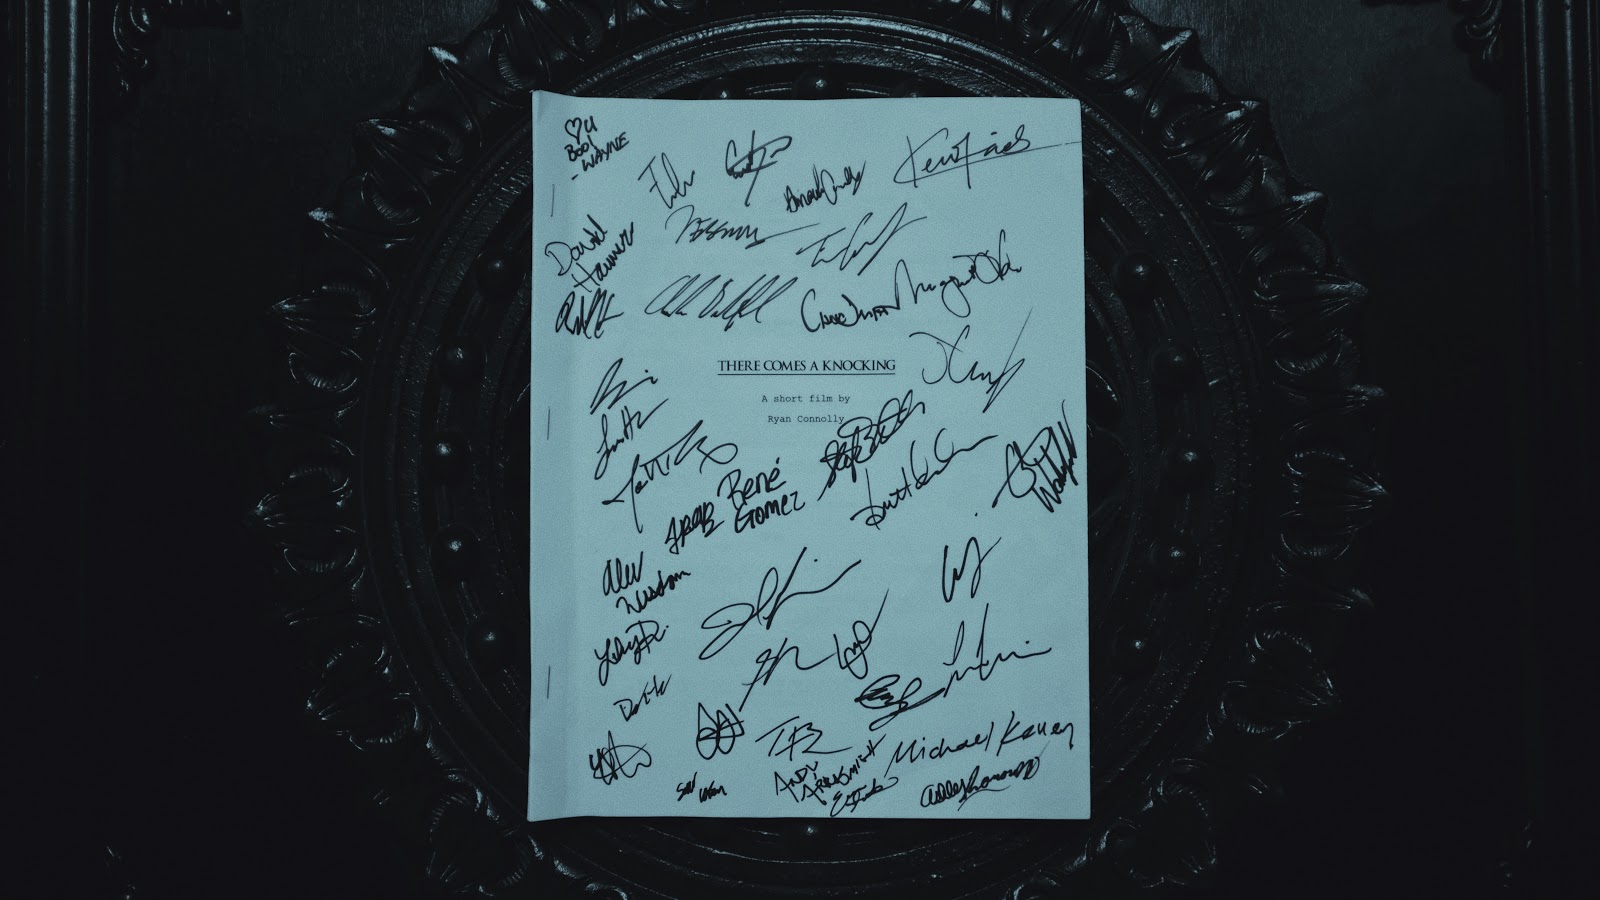 Cast and crew signed sript